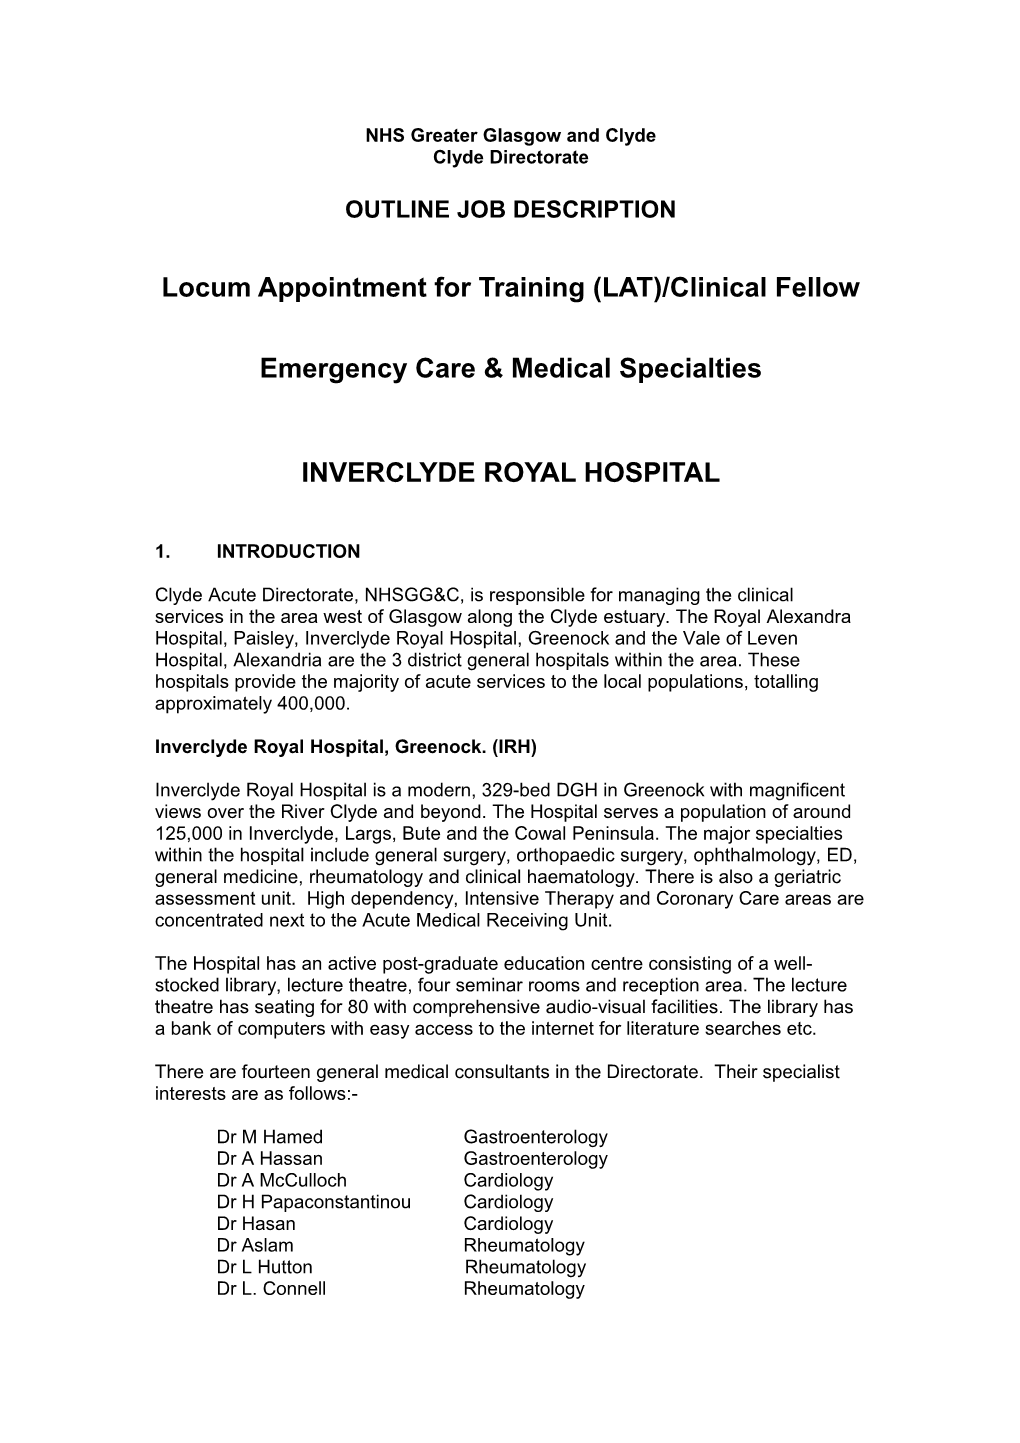 Str LOCUM APPOINTMENT for TRAINING/CLINICAL FELLOW DIABETES/ Endocrinology